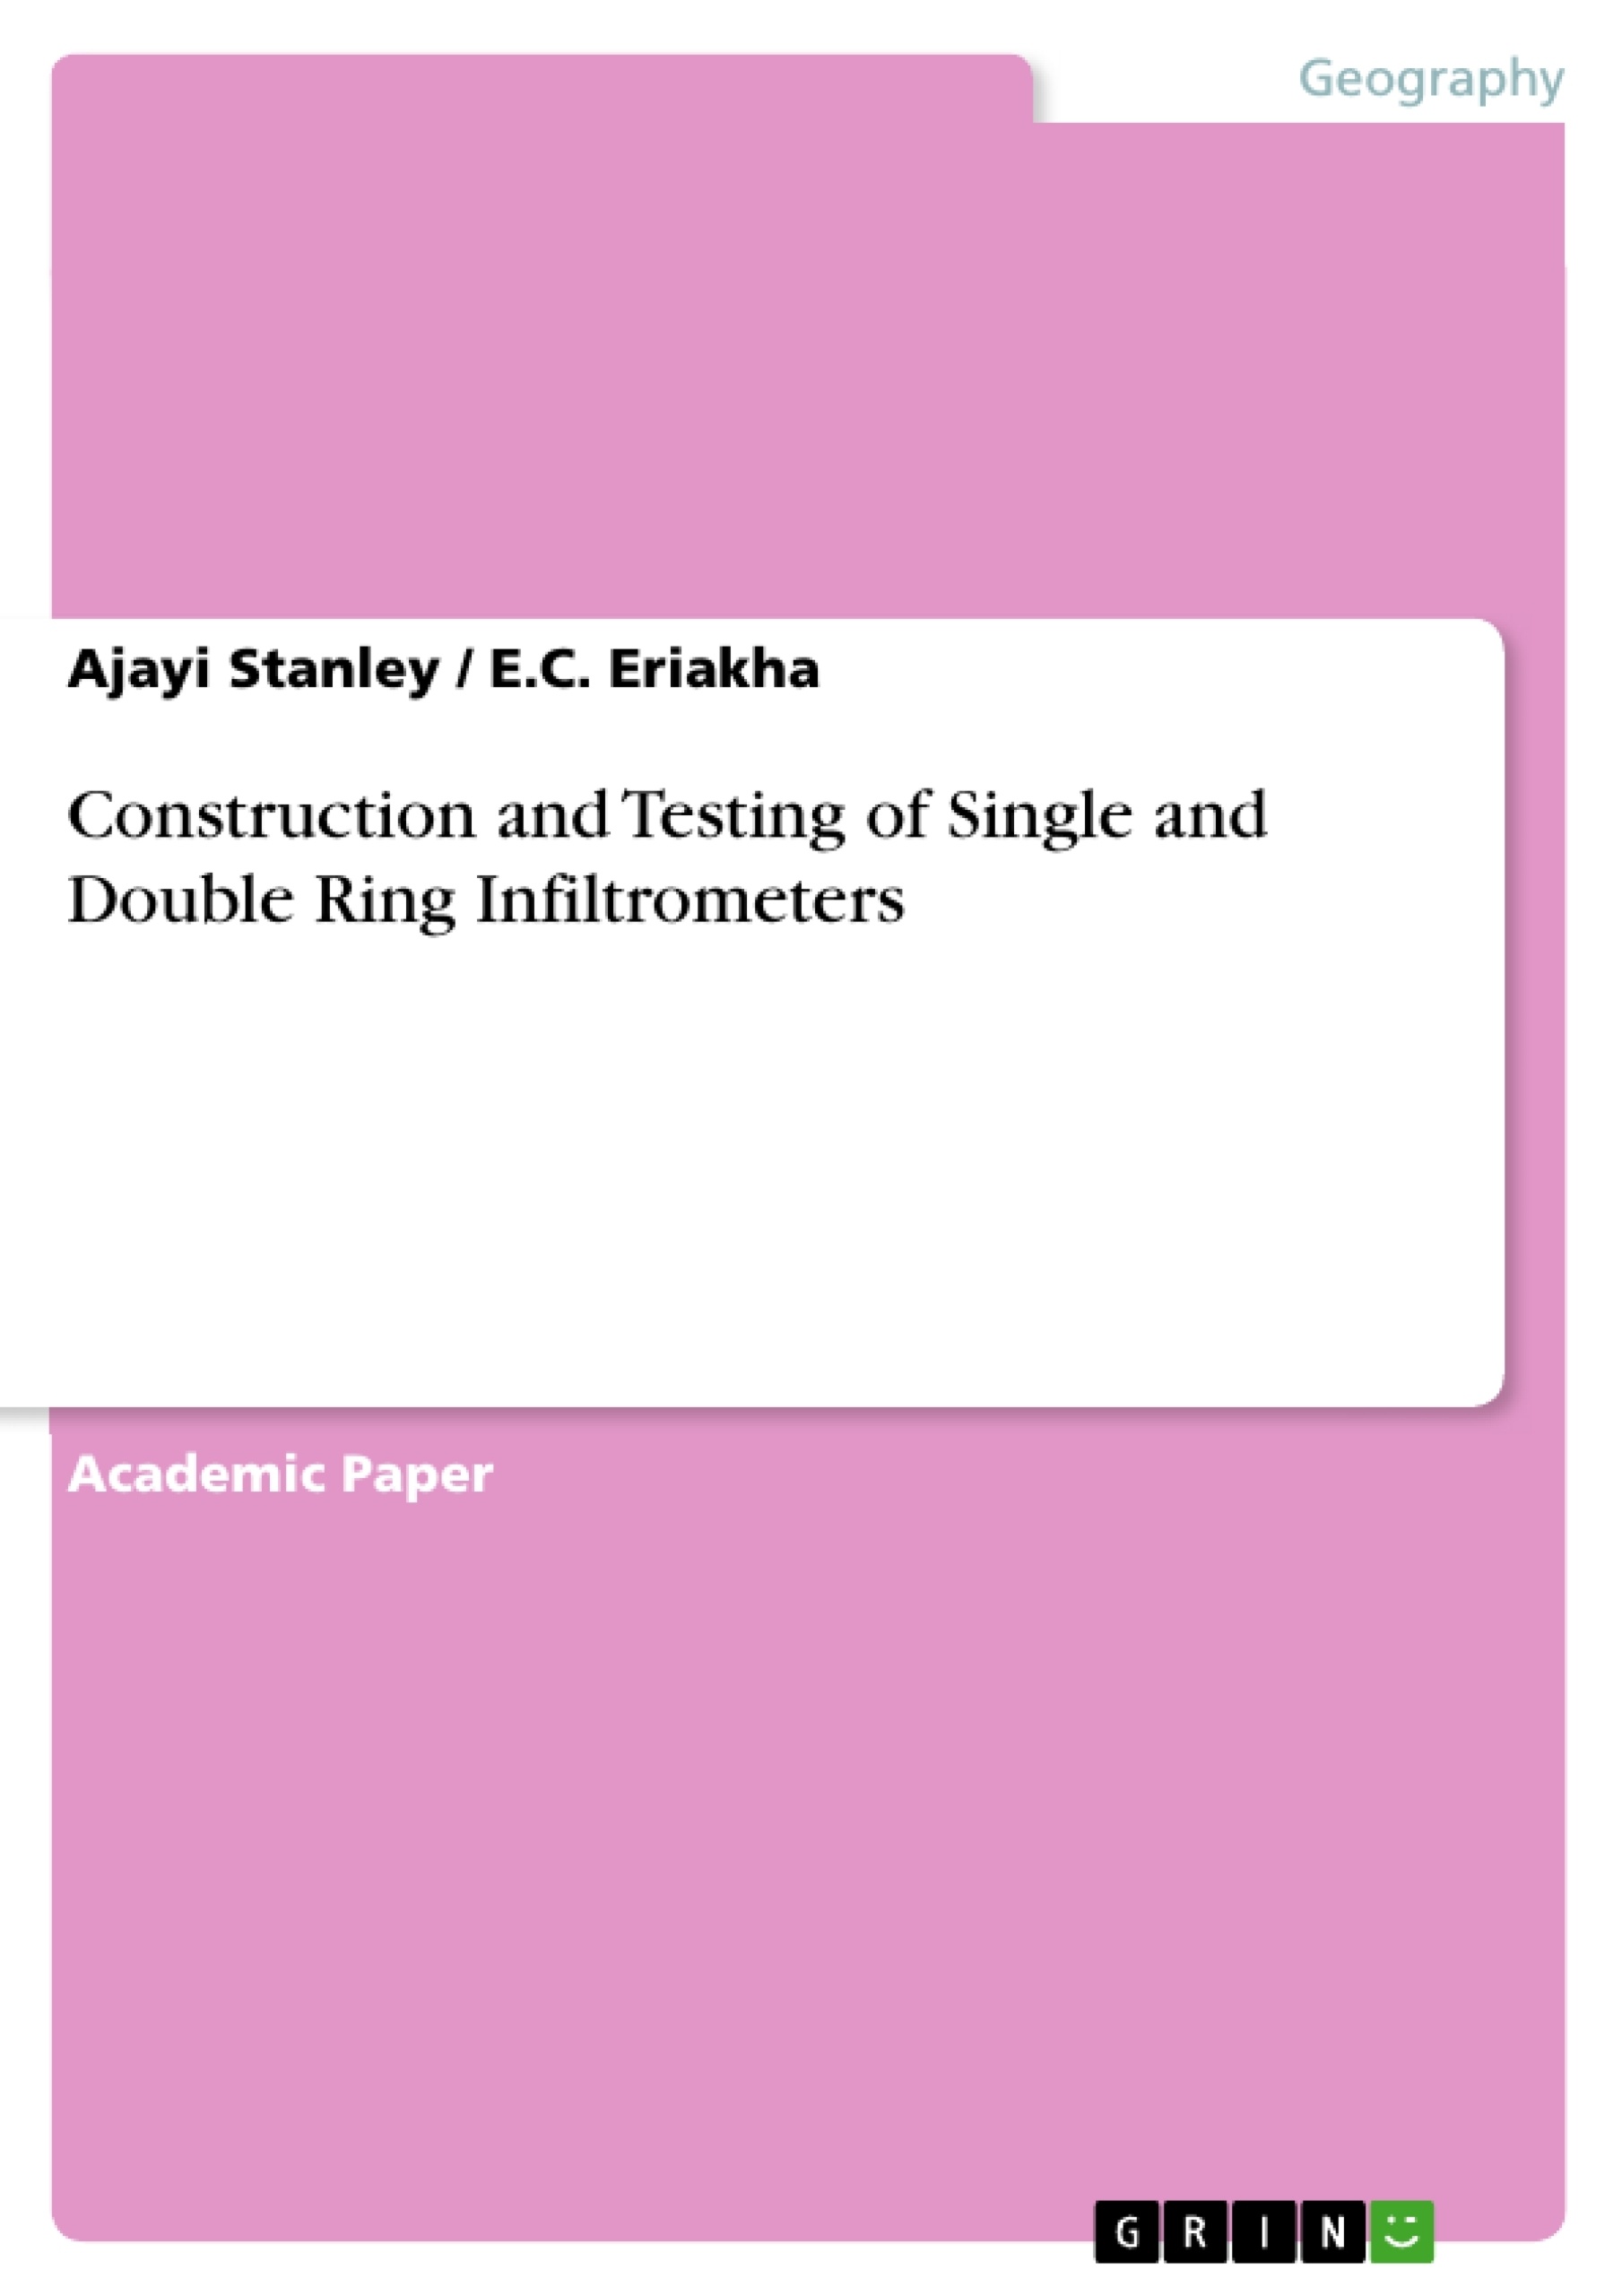 Titre: Construction and Testing of Single and Double Ring Infiltrometers